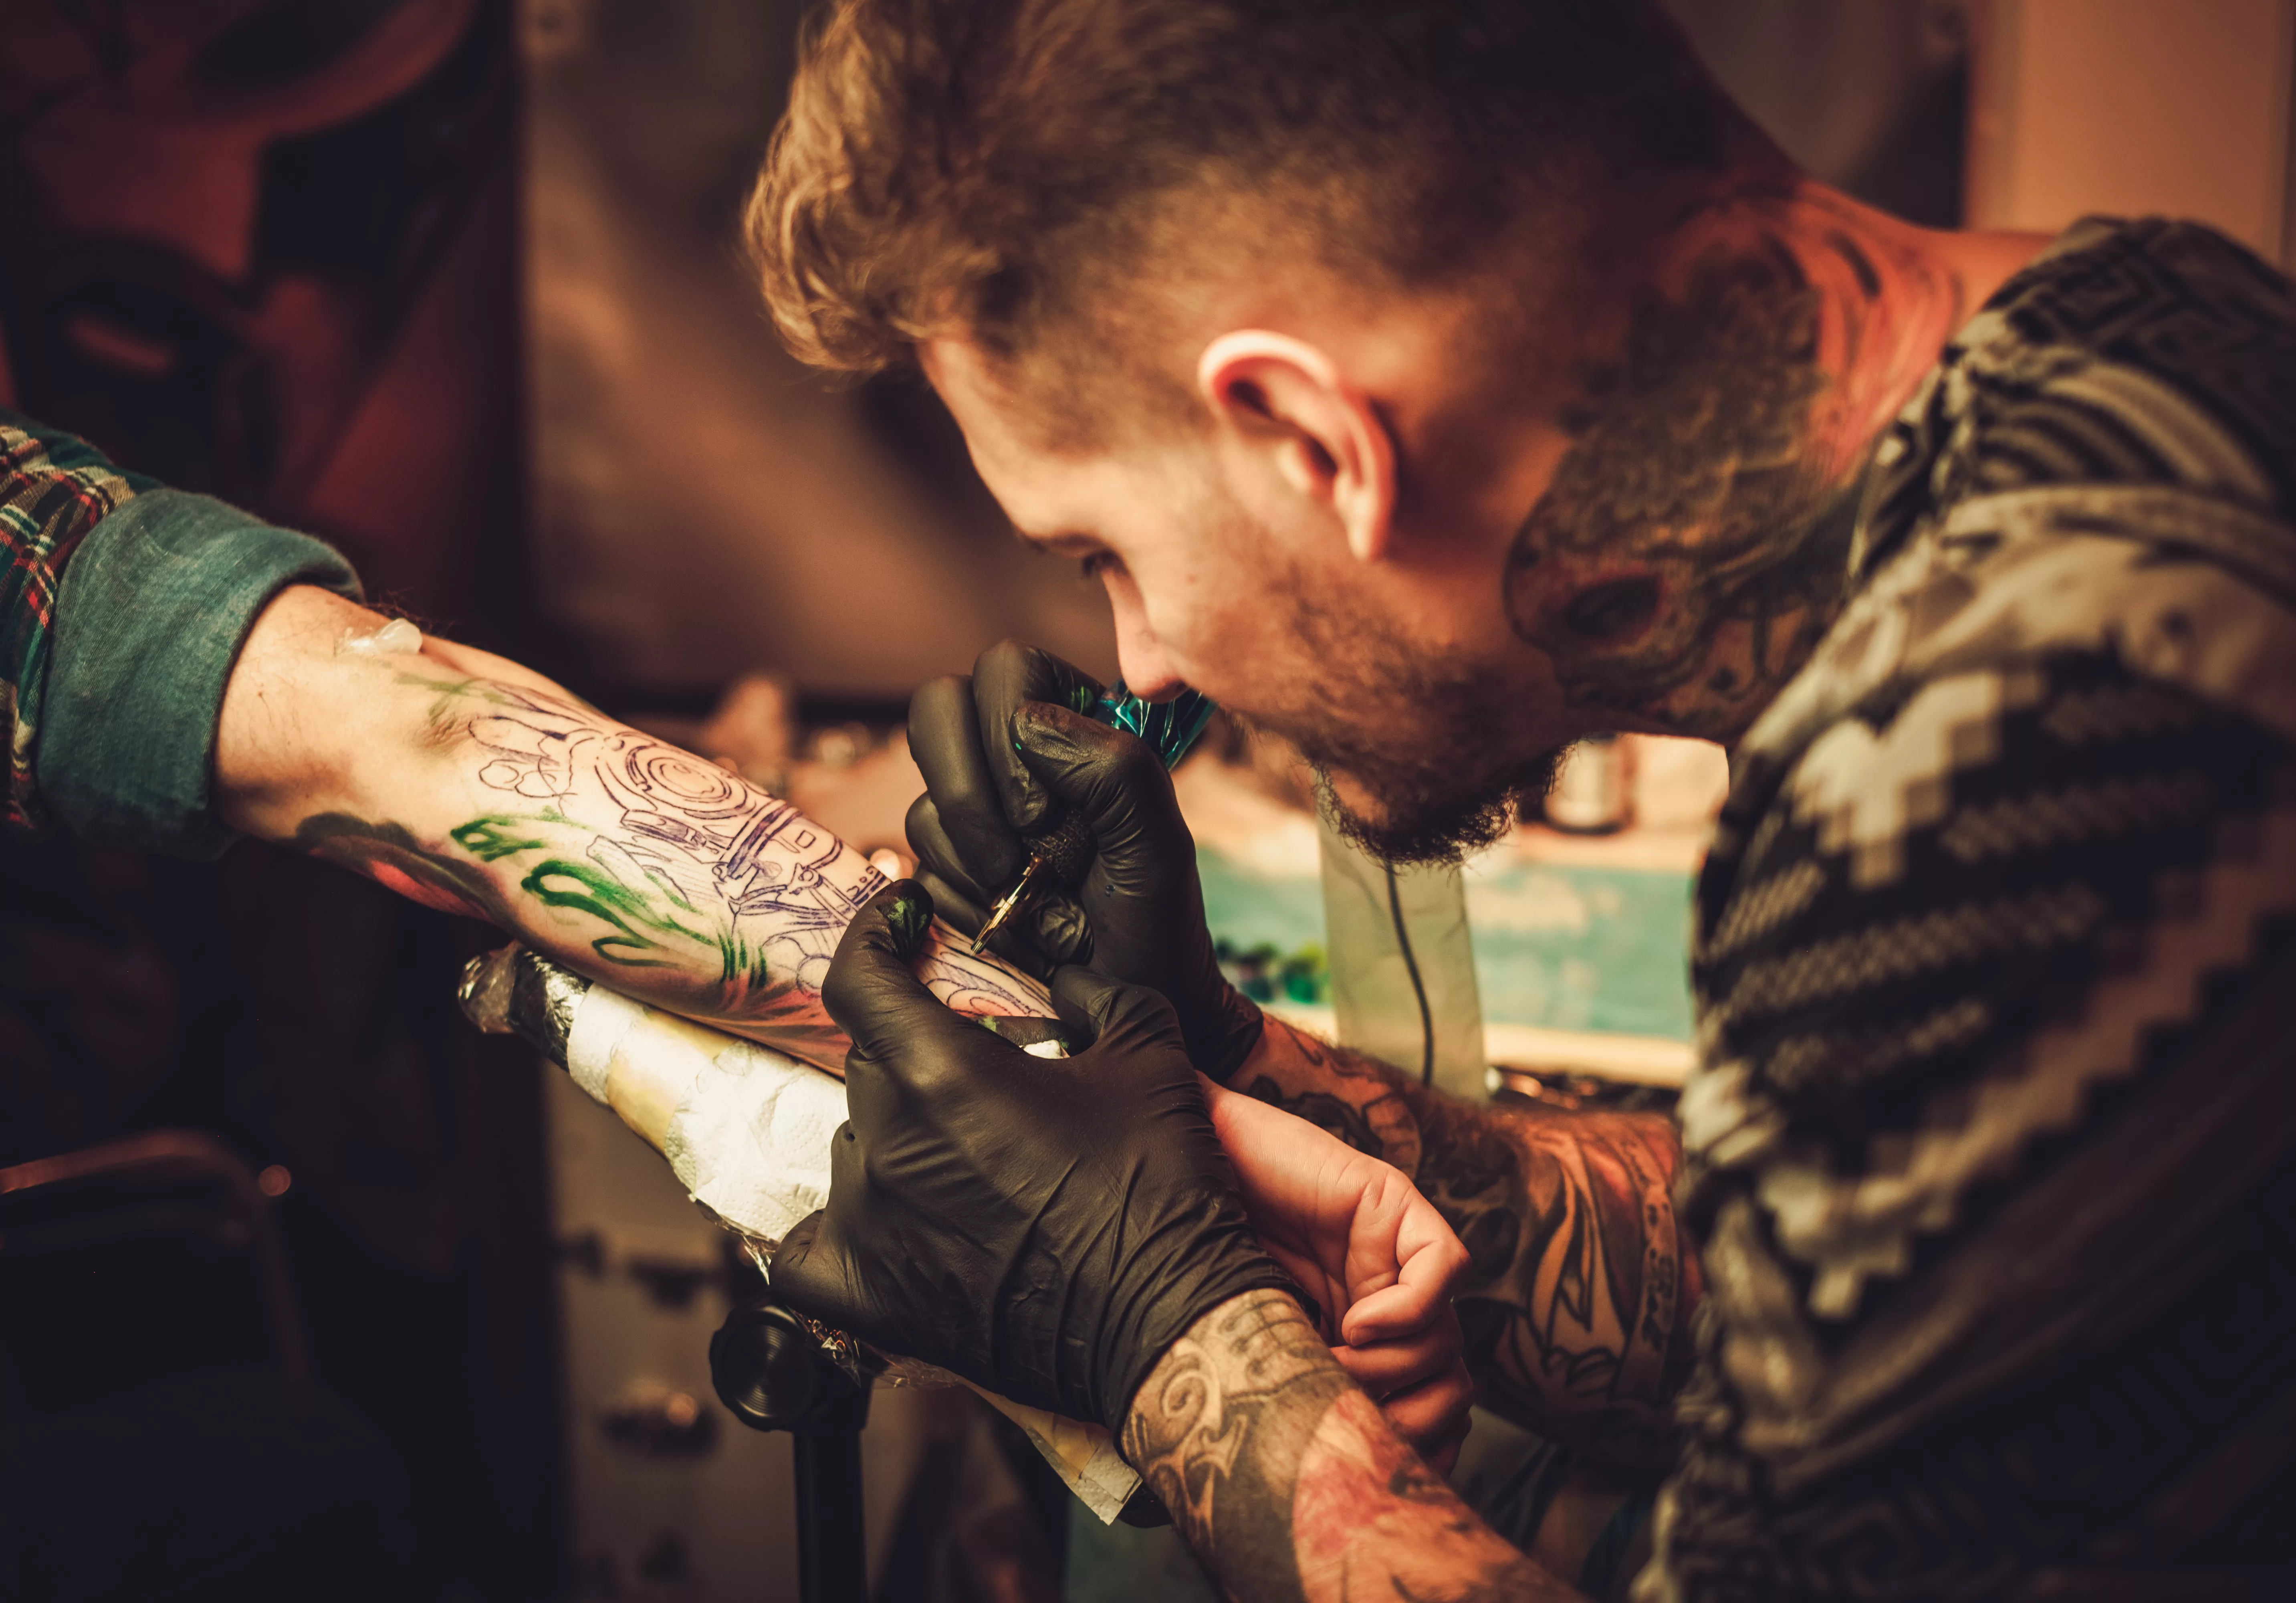 HOW TO BE SUCCESSFUL AS A TATTOO ARTIST - 𝕚𝕟𝕜𝐌𝐄𝐍𝐓𝐎𝐑 - YouTube